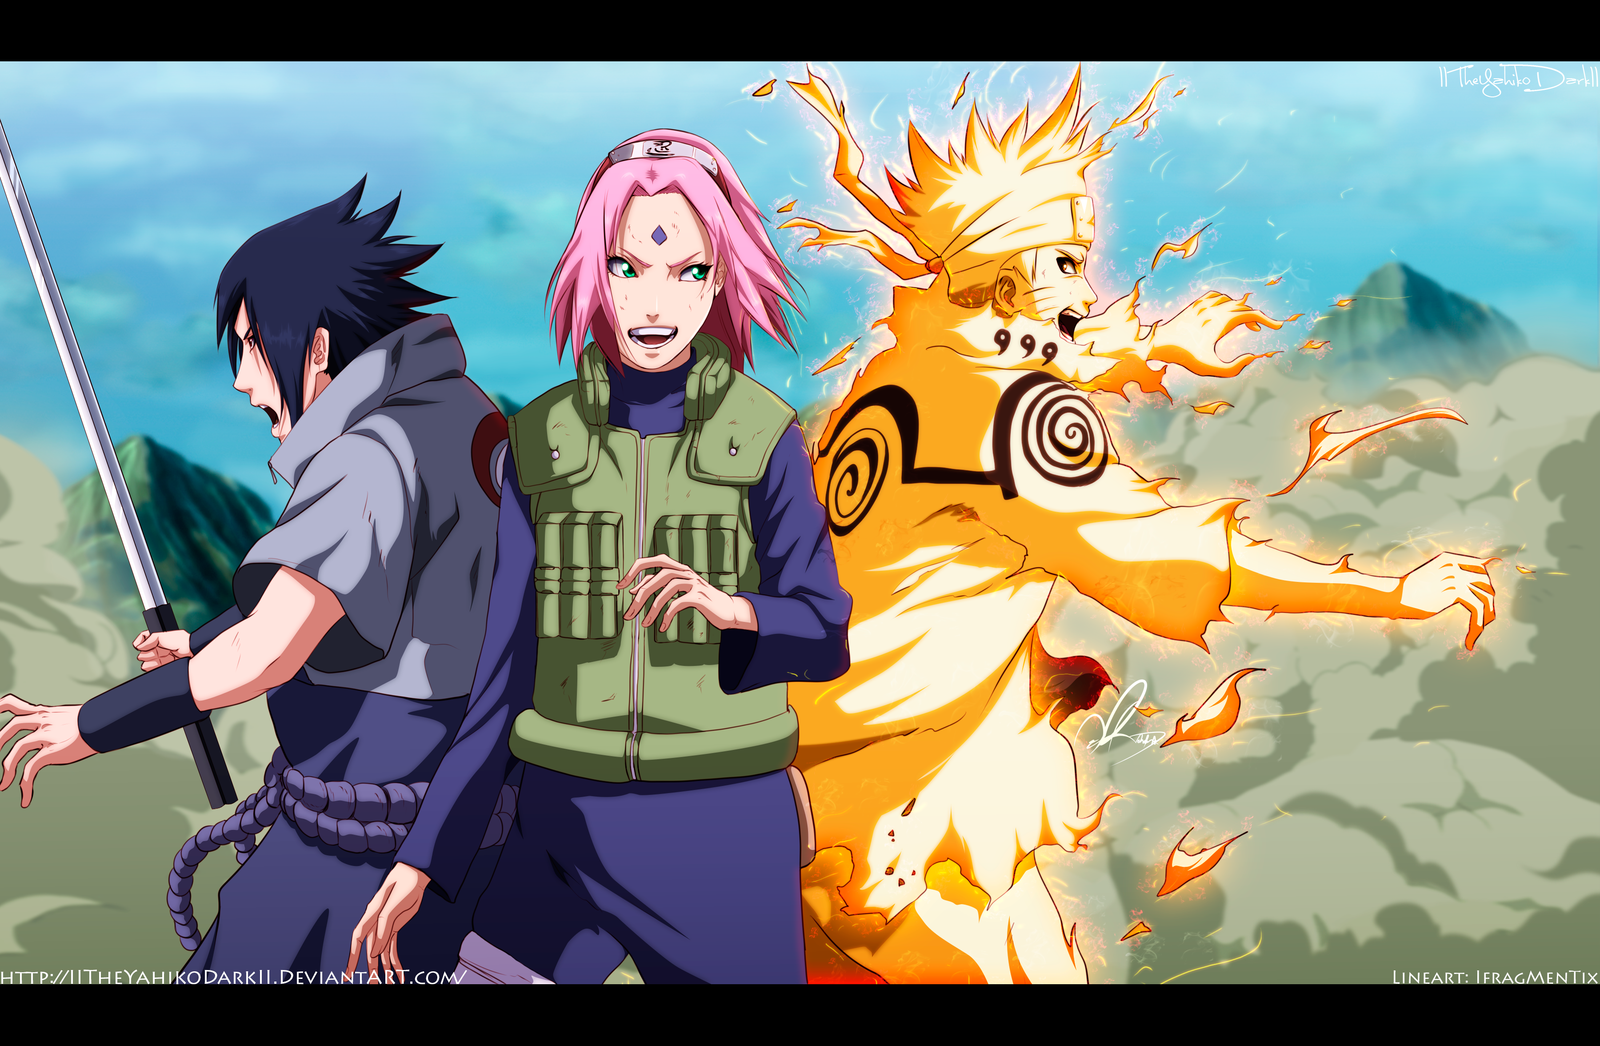 The Leaky Thoughts: So Naruto is Ending...That Kinda Sucks